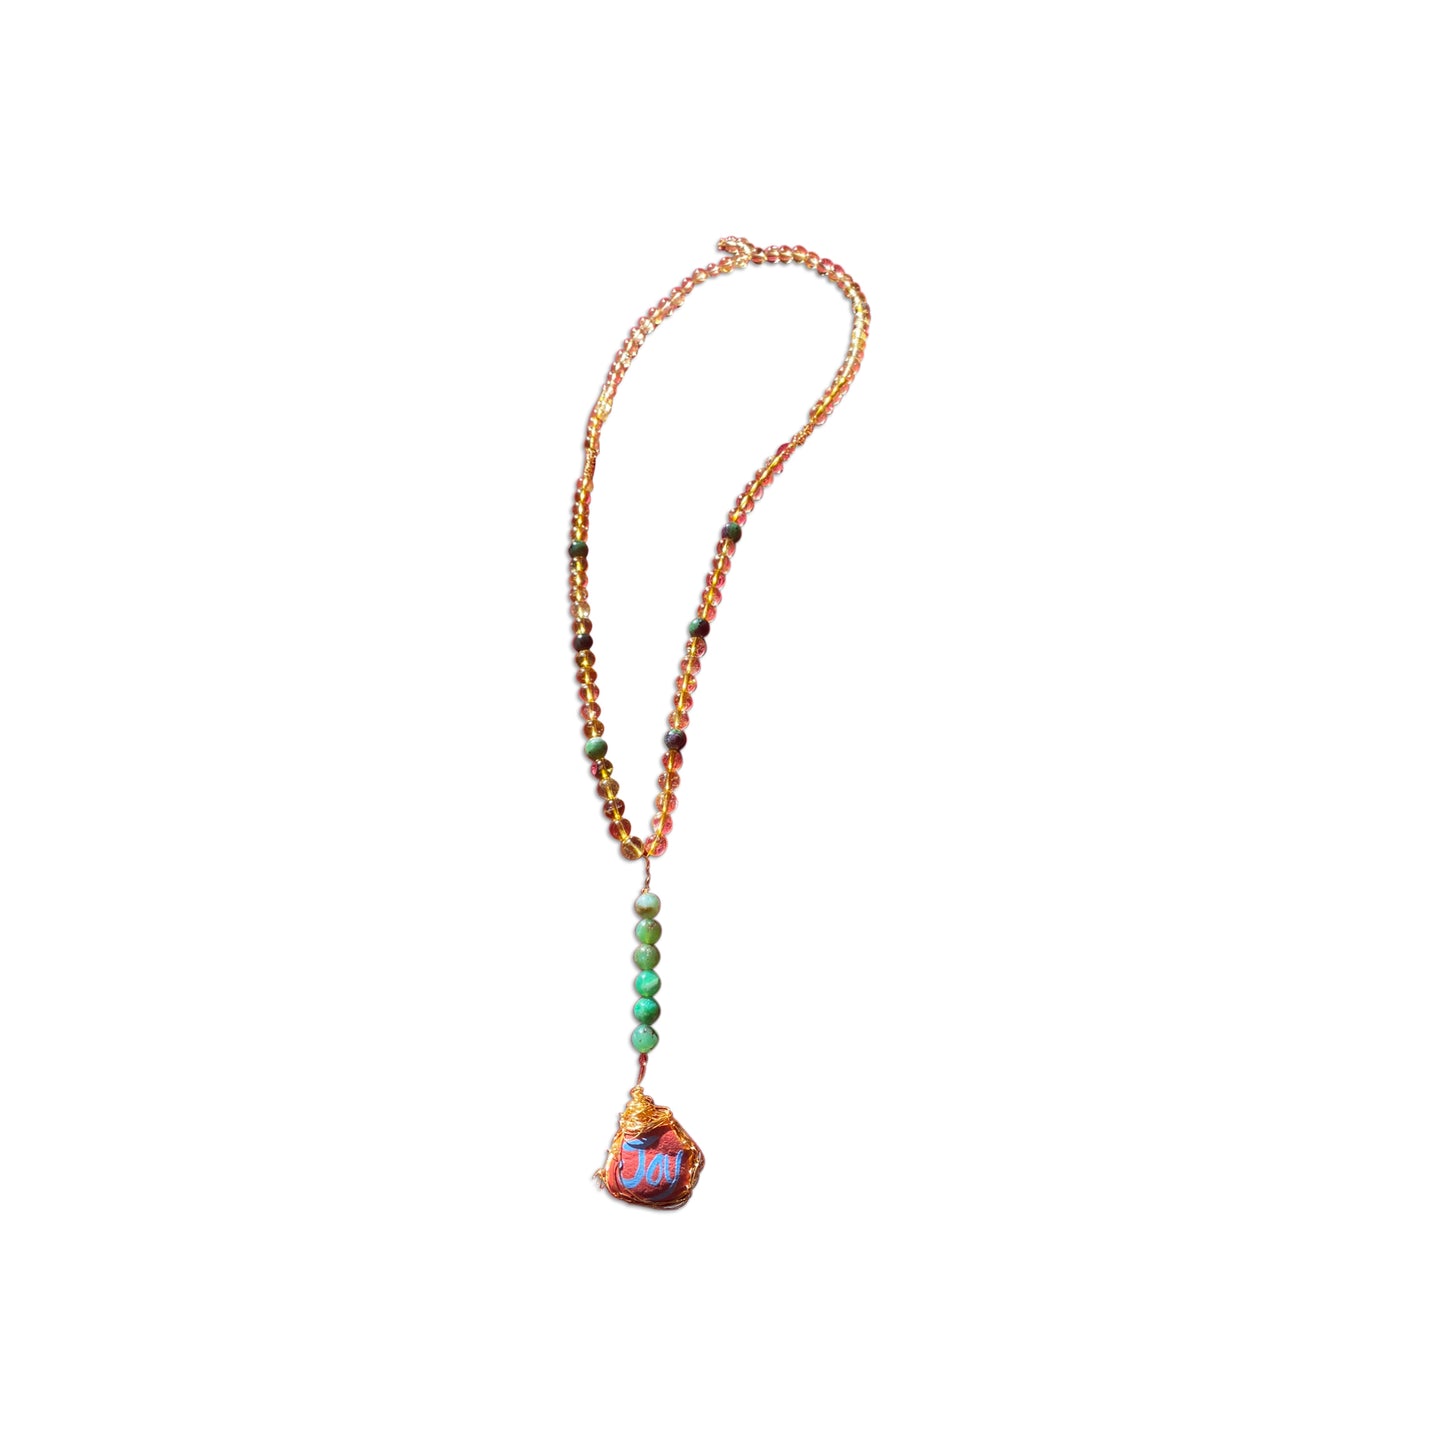 Alessandra Mattanza | JOY - An ART TOTEM NECKLACE, created from precious and semiprecious stones, for good energy and luck, to be hung on a wall, displayed on a table, or worn only on very special occasions.